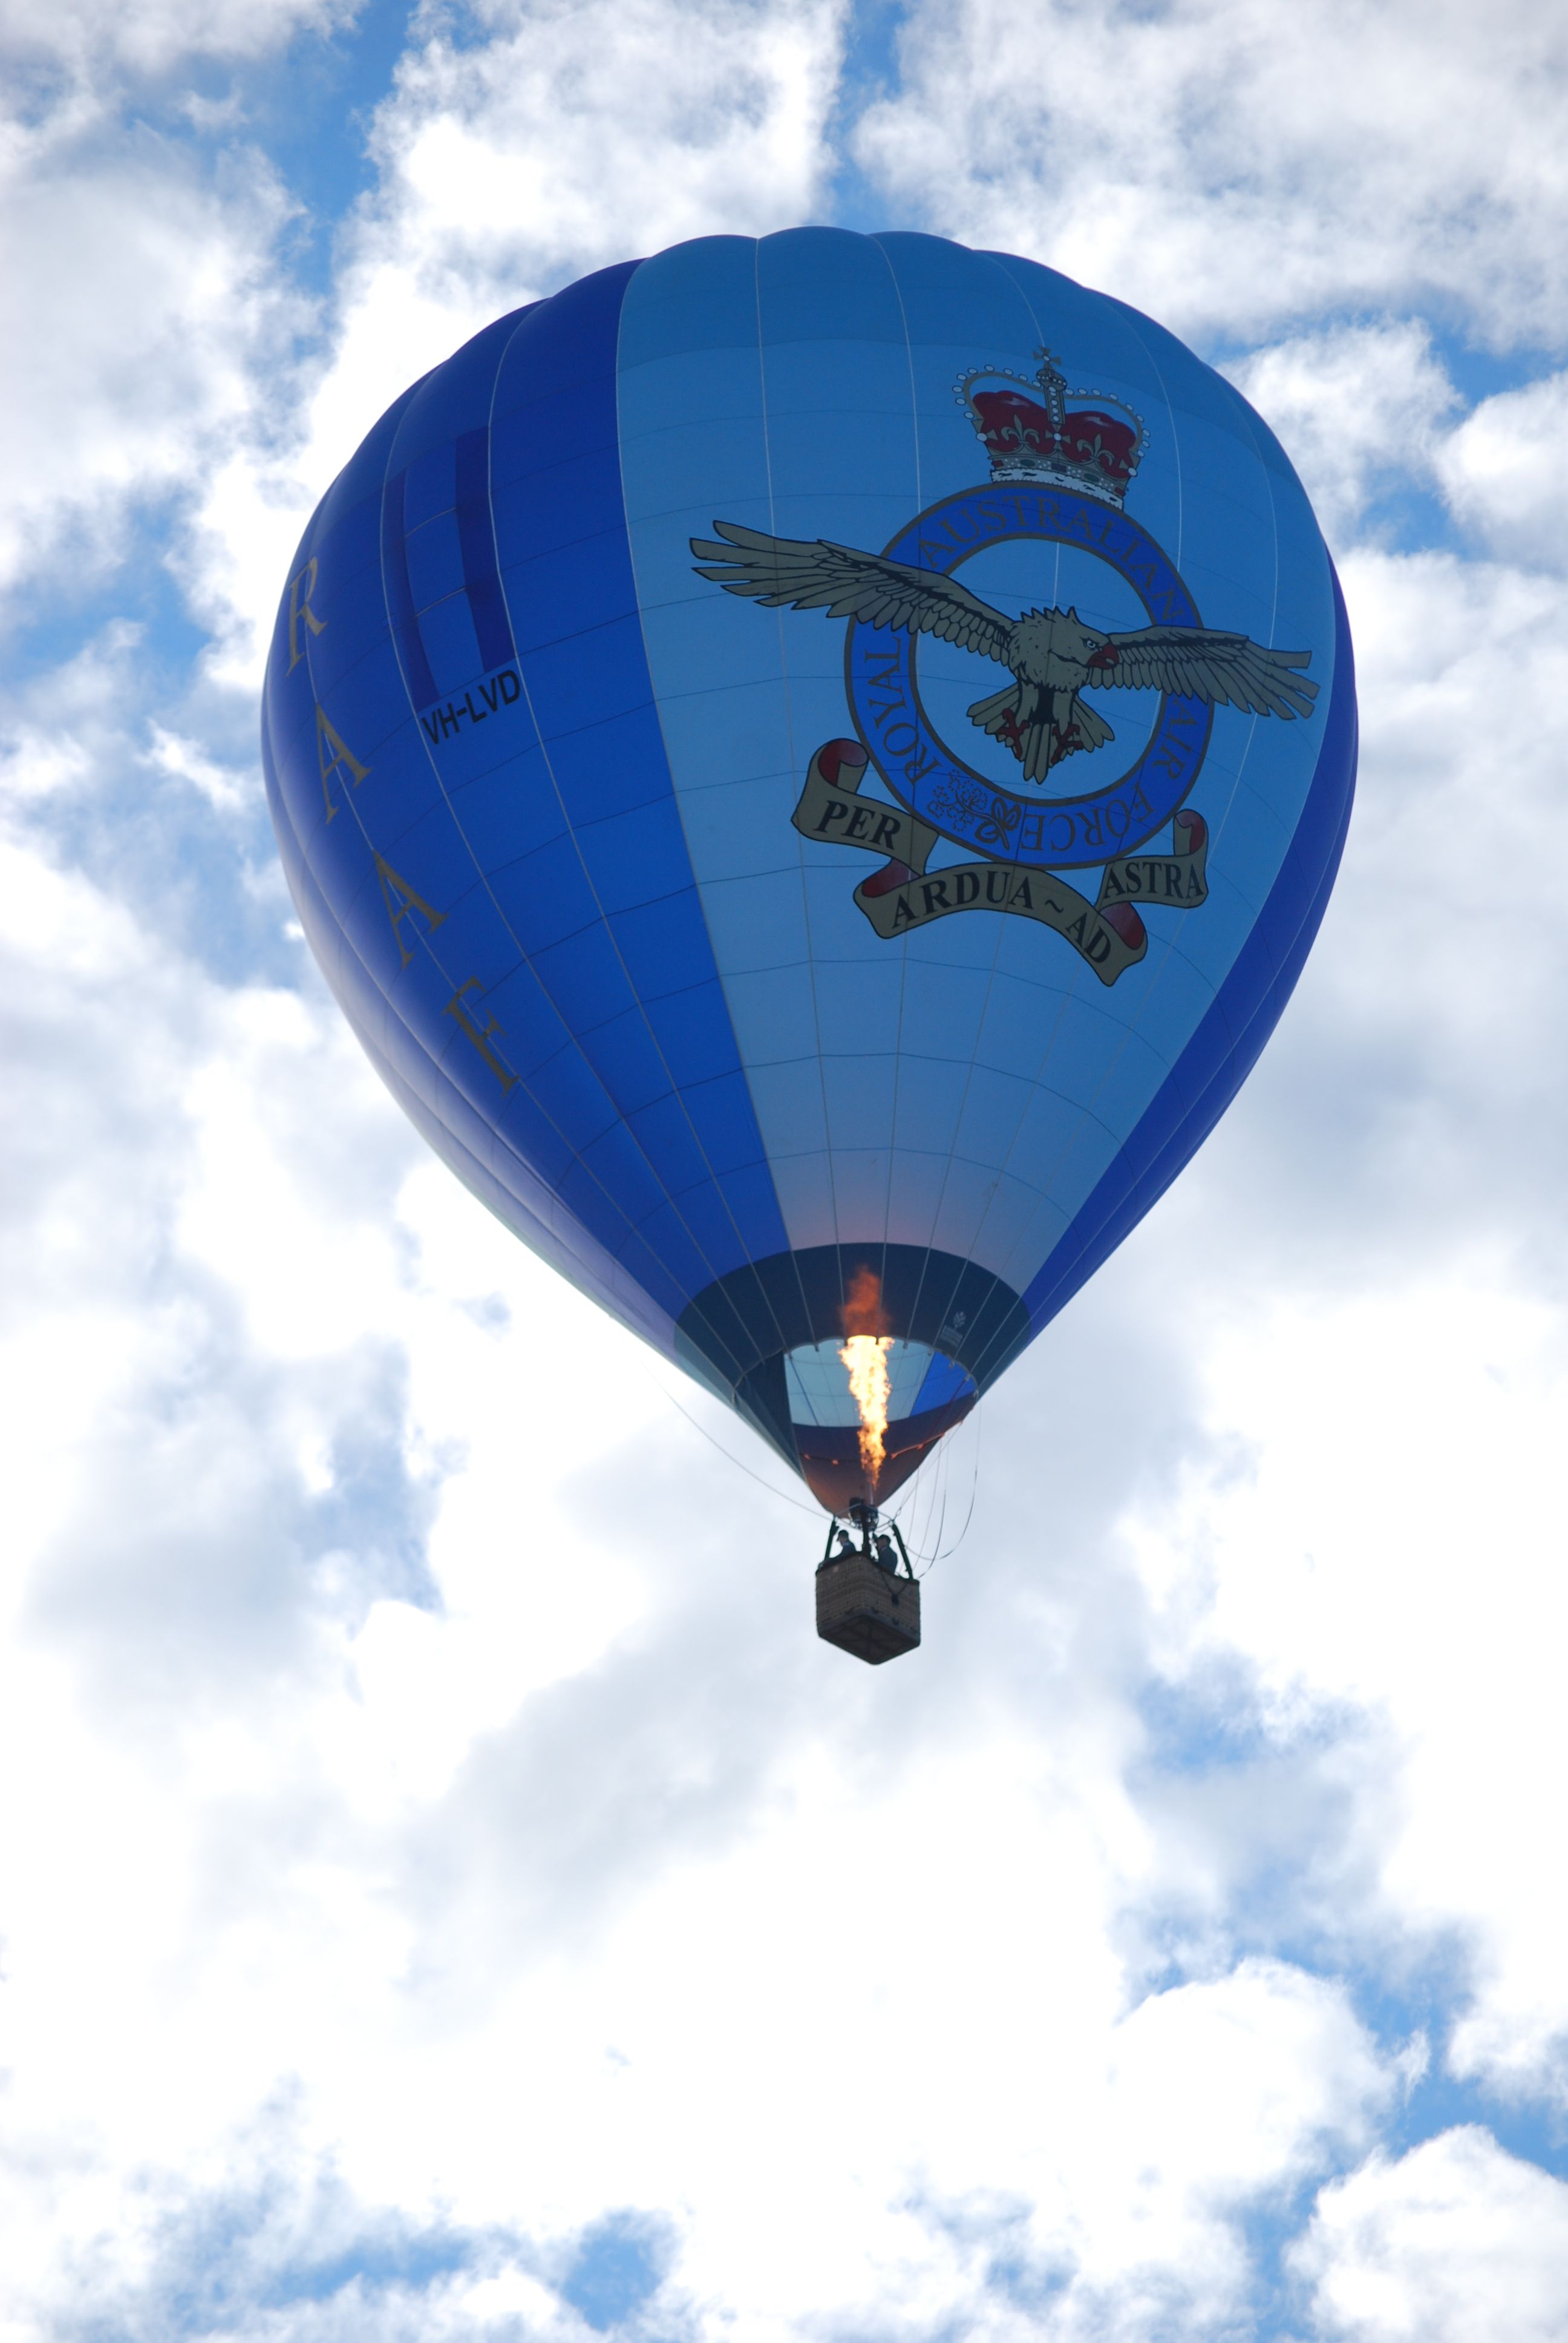 VH-LVD — - The Royal Australian Airforce operate two Hot Air balloons for promotional purposes.br /There is a waiting list of pilots who would like to convert!